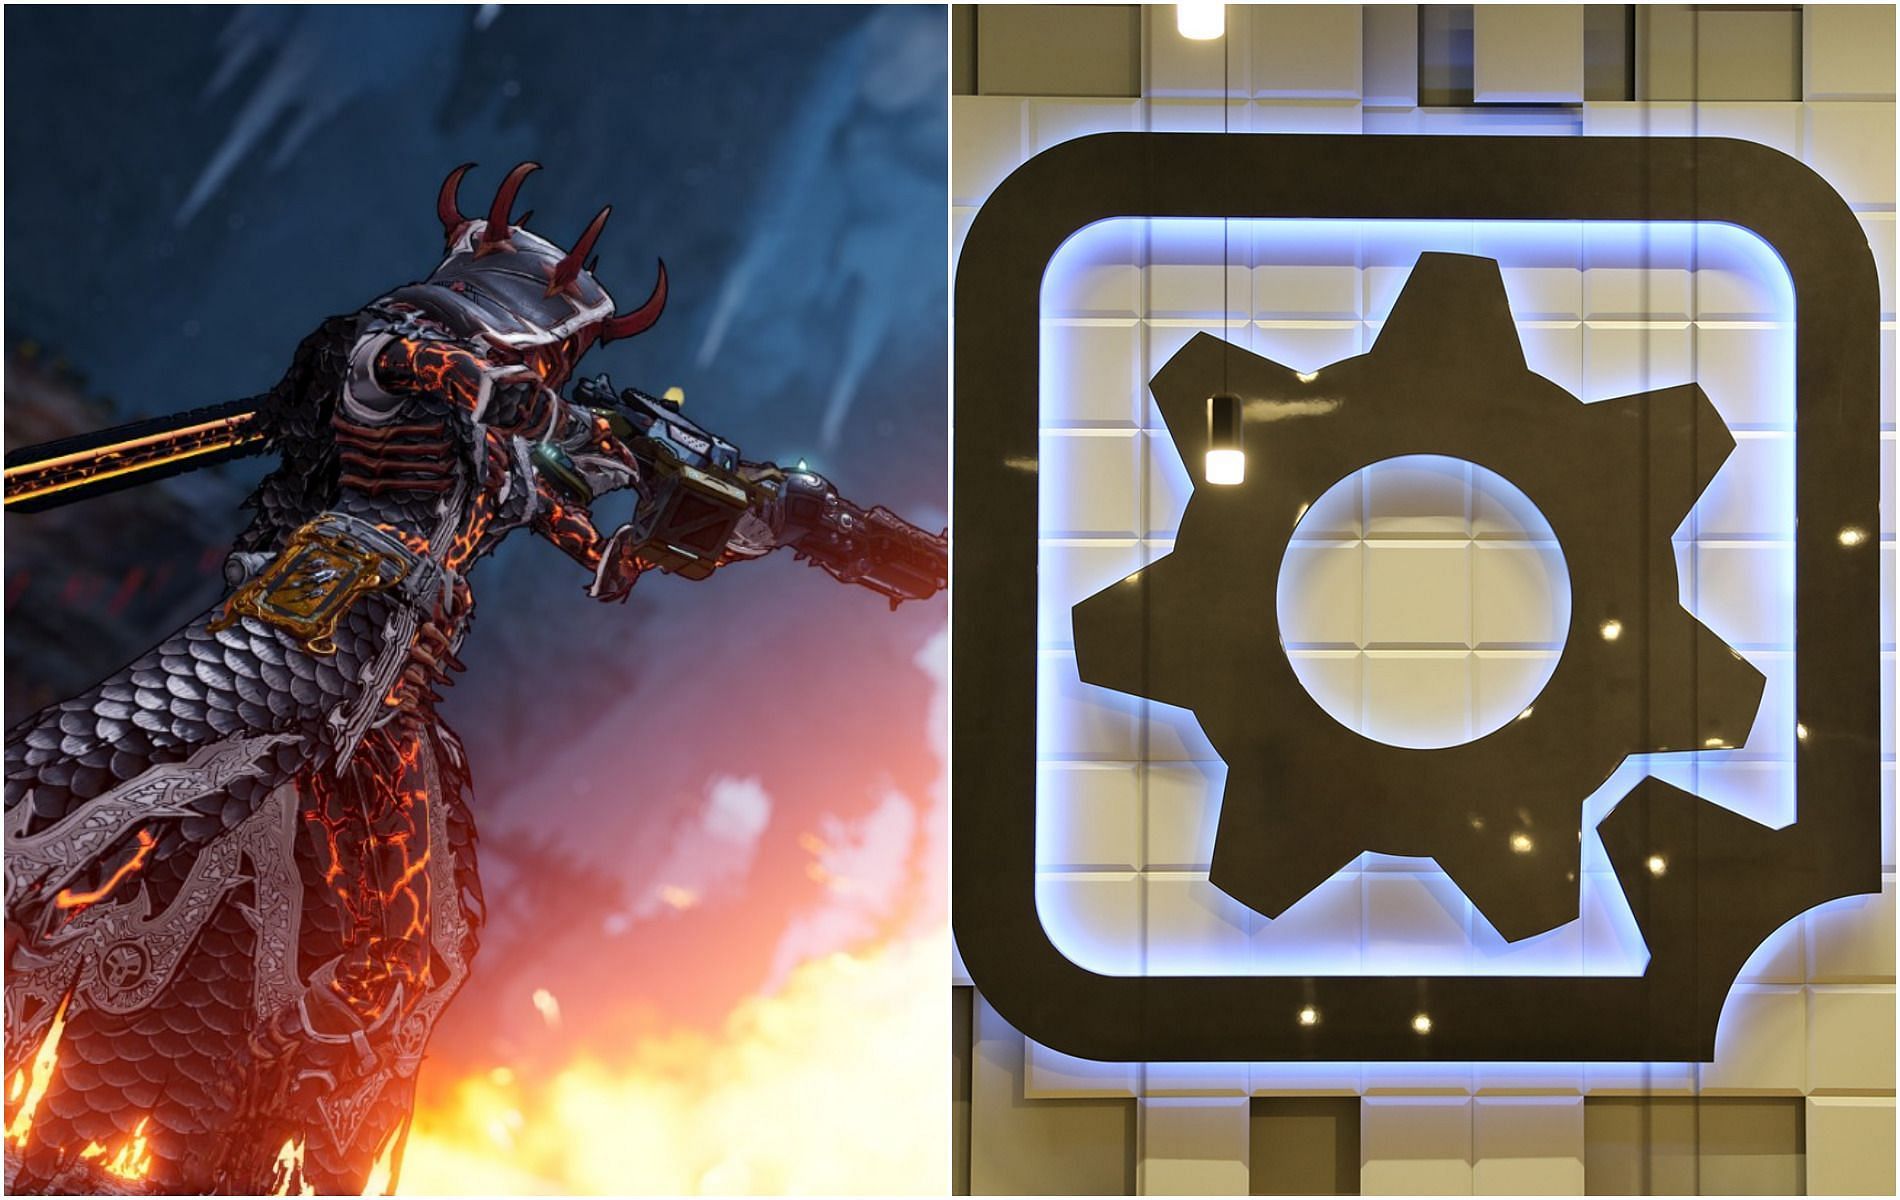 Goodies for the recent shooter are pouring already (Images via Gearbox Software)